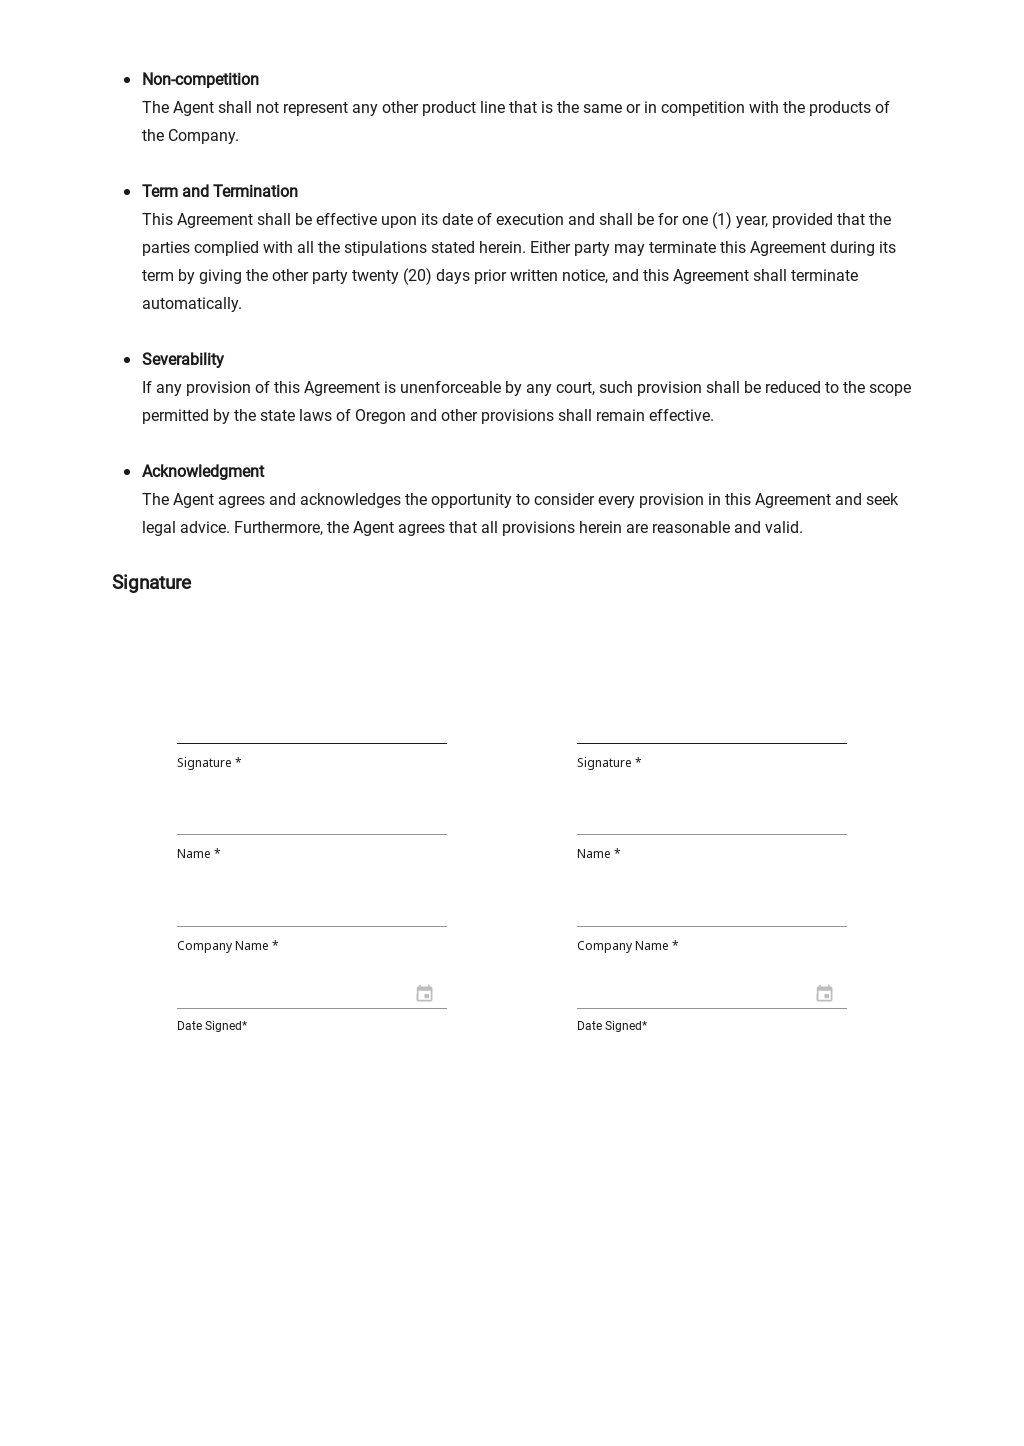 Sales Agency Agreement With Trademarks Protection Template 2.jpe